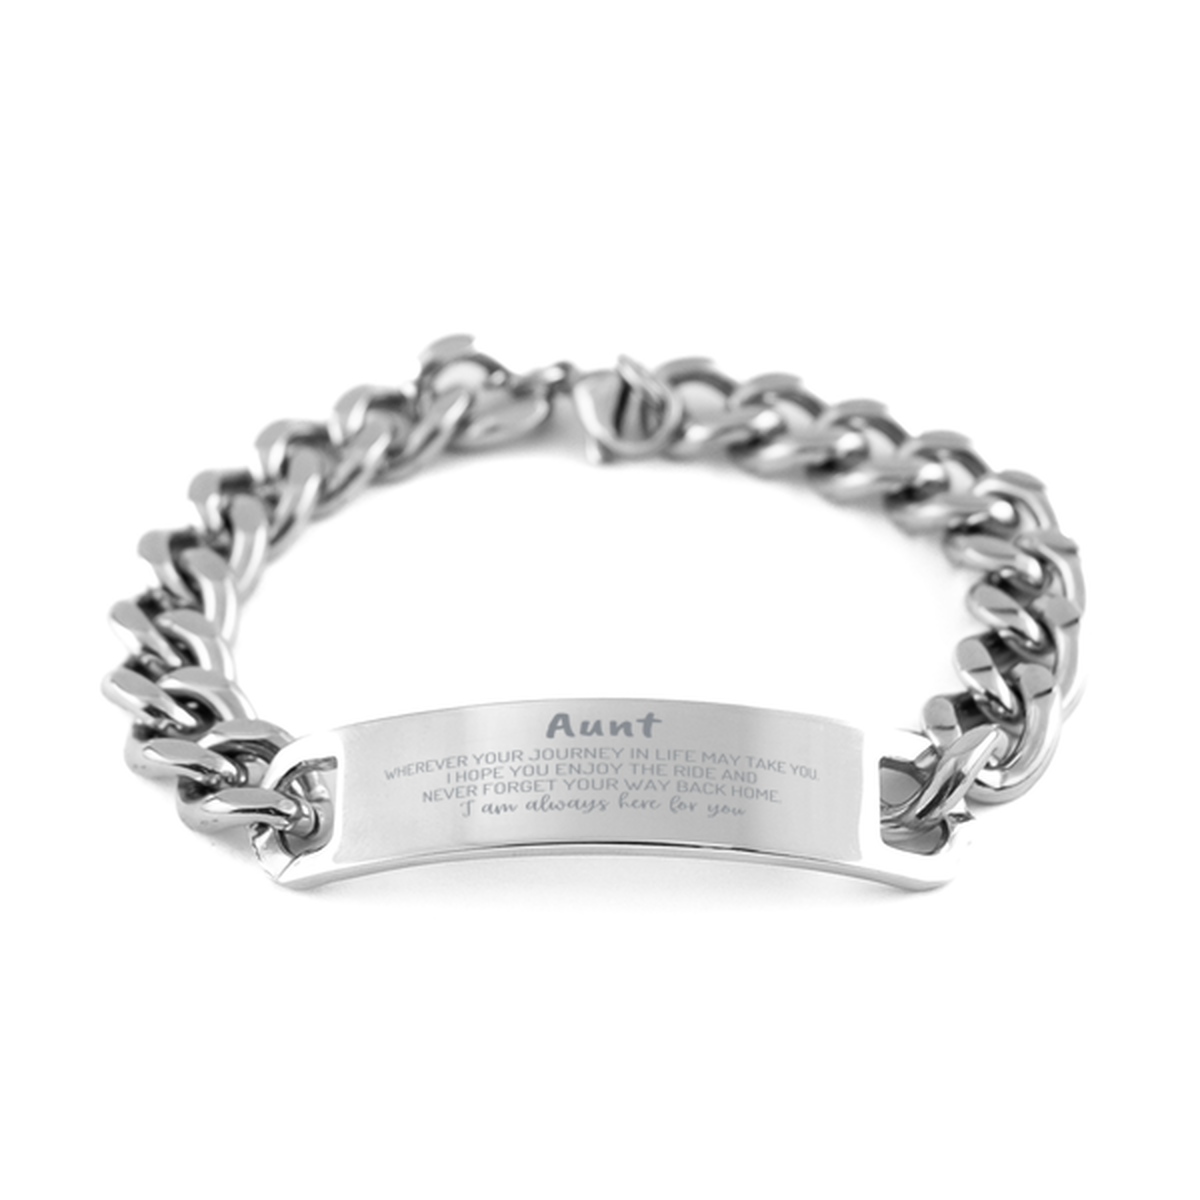 Aunt wherever your journey in life may take you, I am always here for you Aunt Cuban Chain Stainless Steel Bracelet, Awesome Christmas Gifts For Aunt, Aunt Birthday Gifts for Men Women Family Loved One